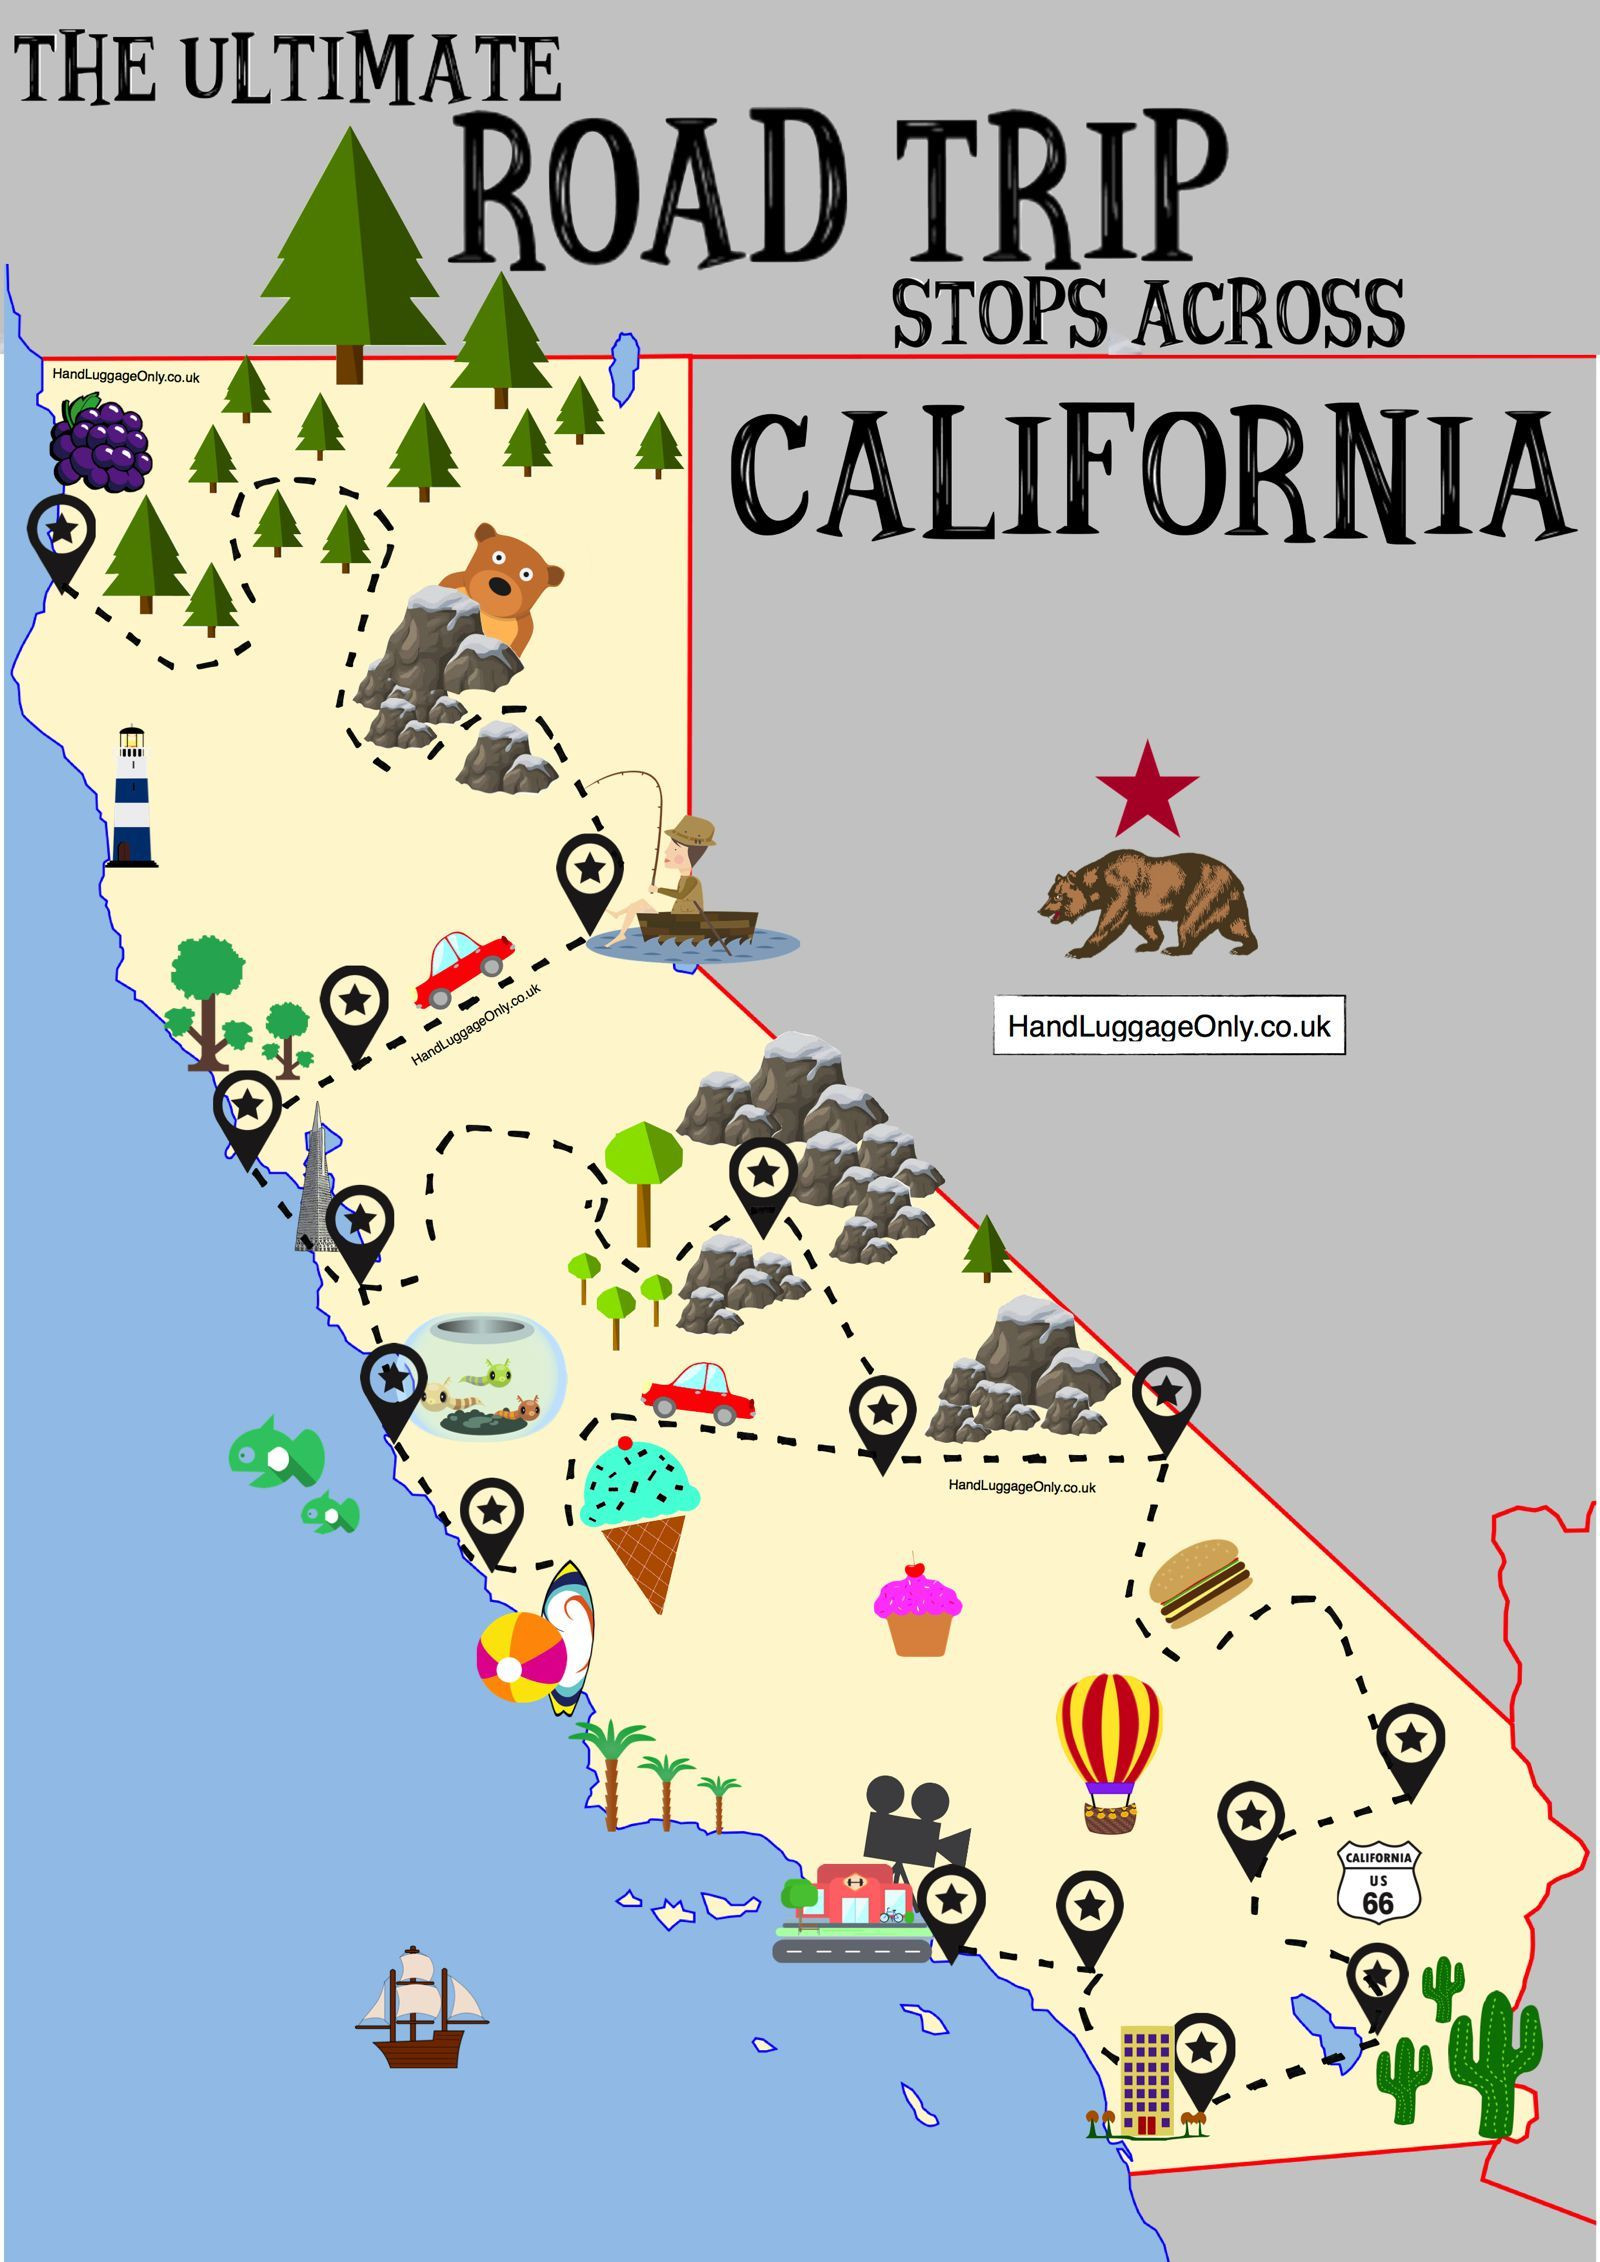 Highway Map Of Northern California Reference The Ultimate Road Trip - Northern California Attractions Map